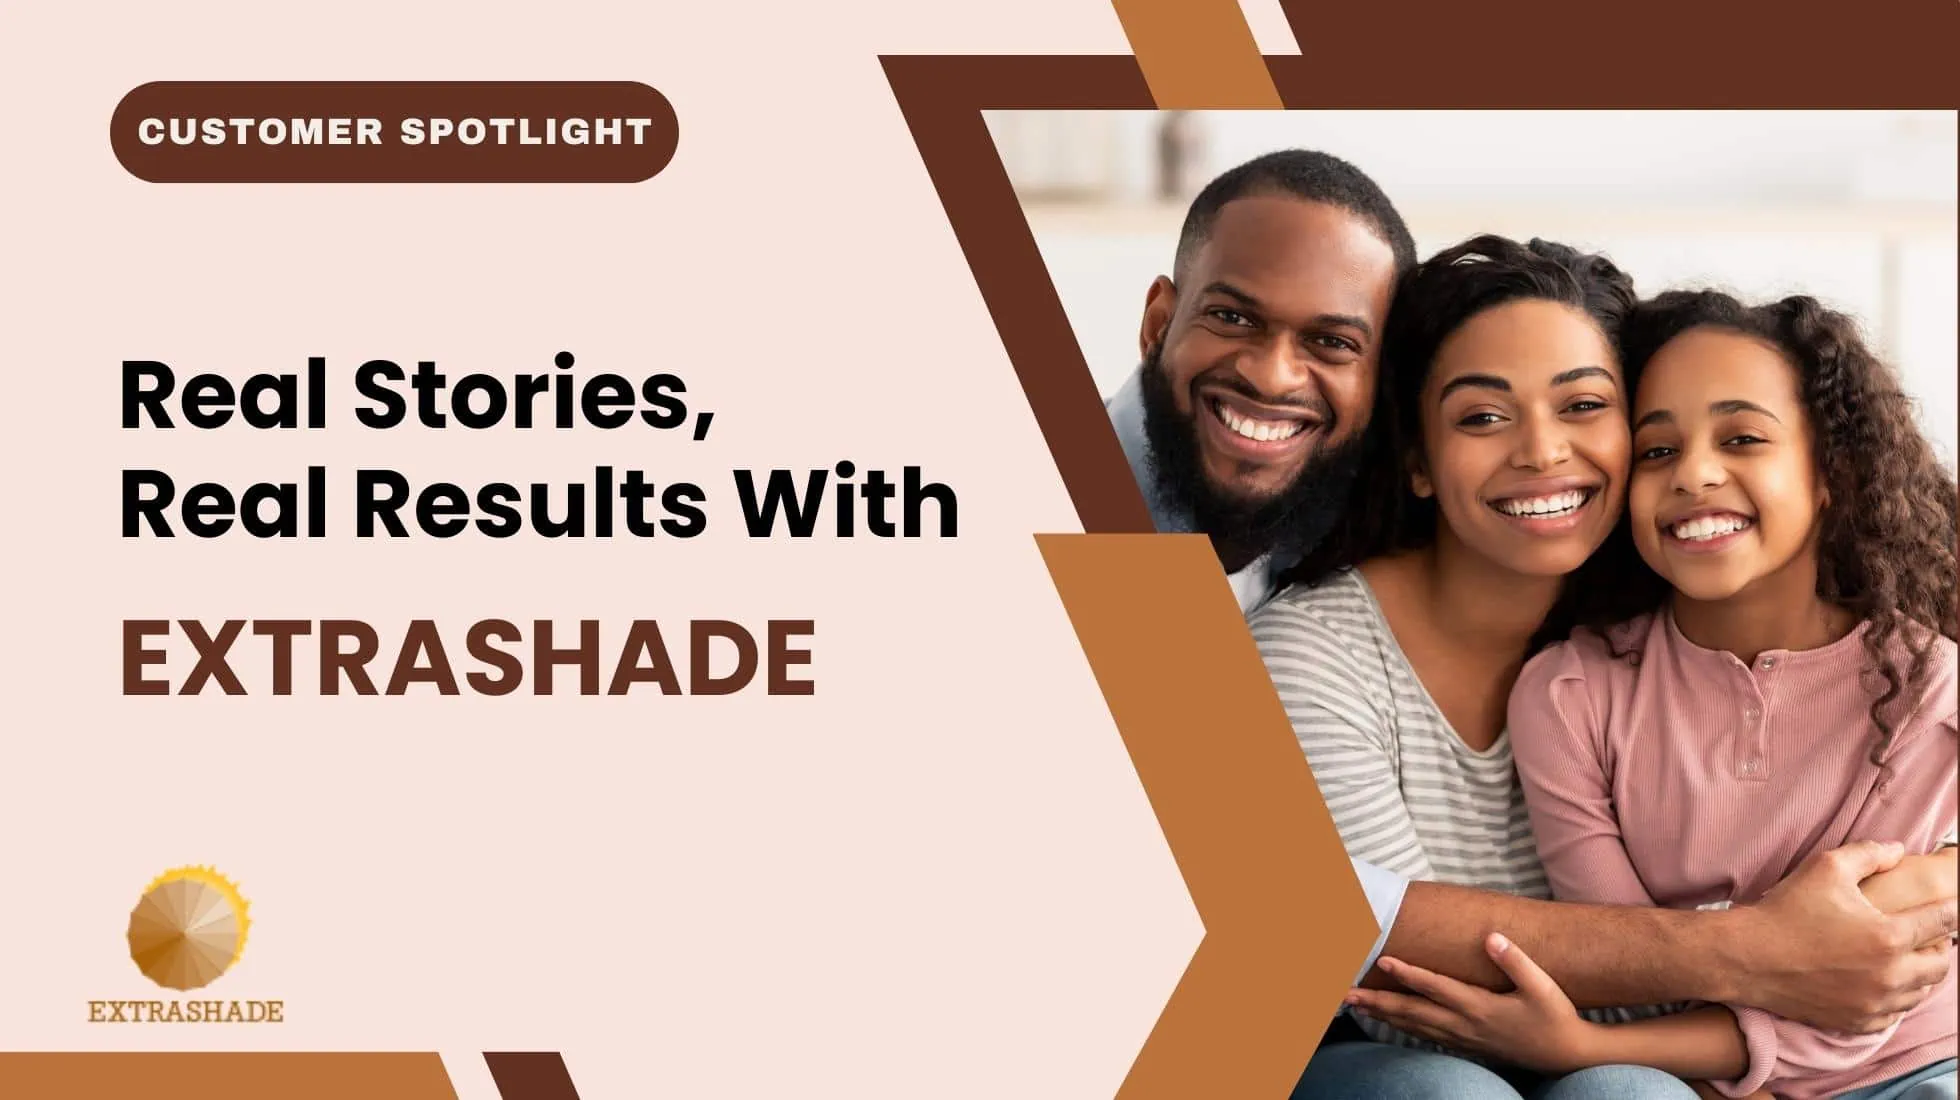 Customer Spotlight Real Stories, Real Results With EXTRASHADE